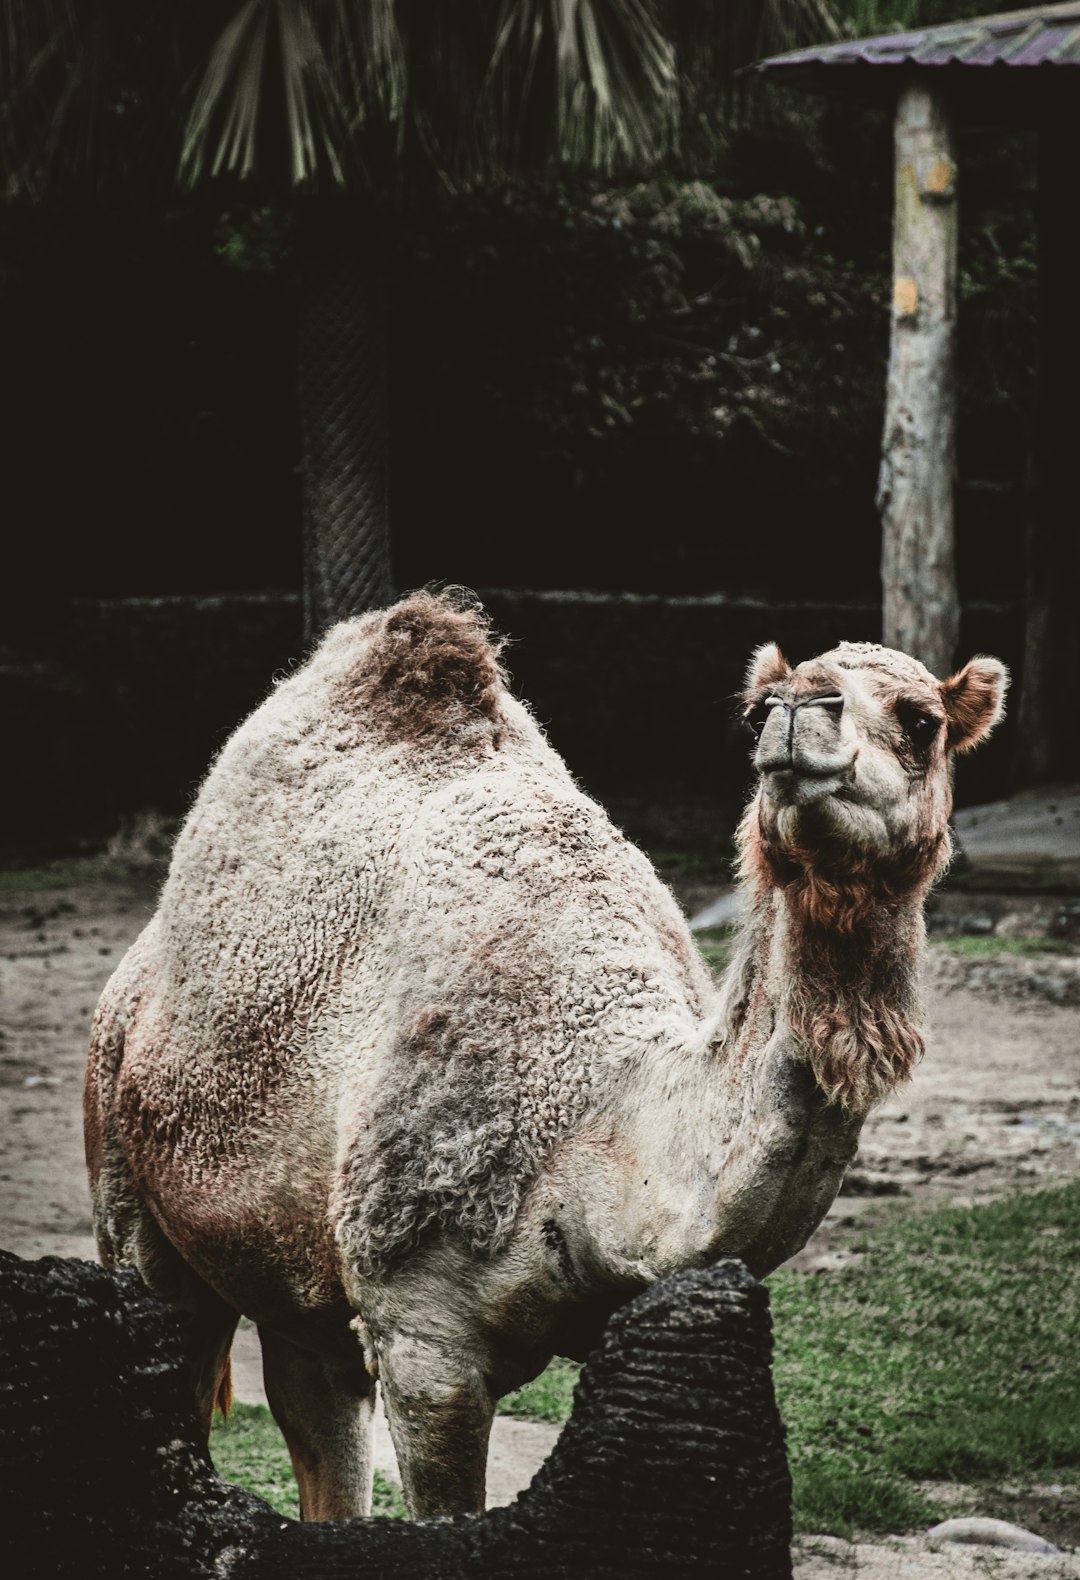 brown camel in front of black metal fence during daytime